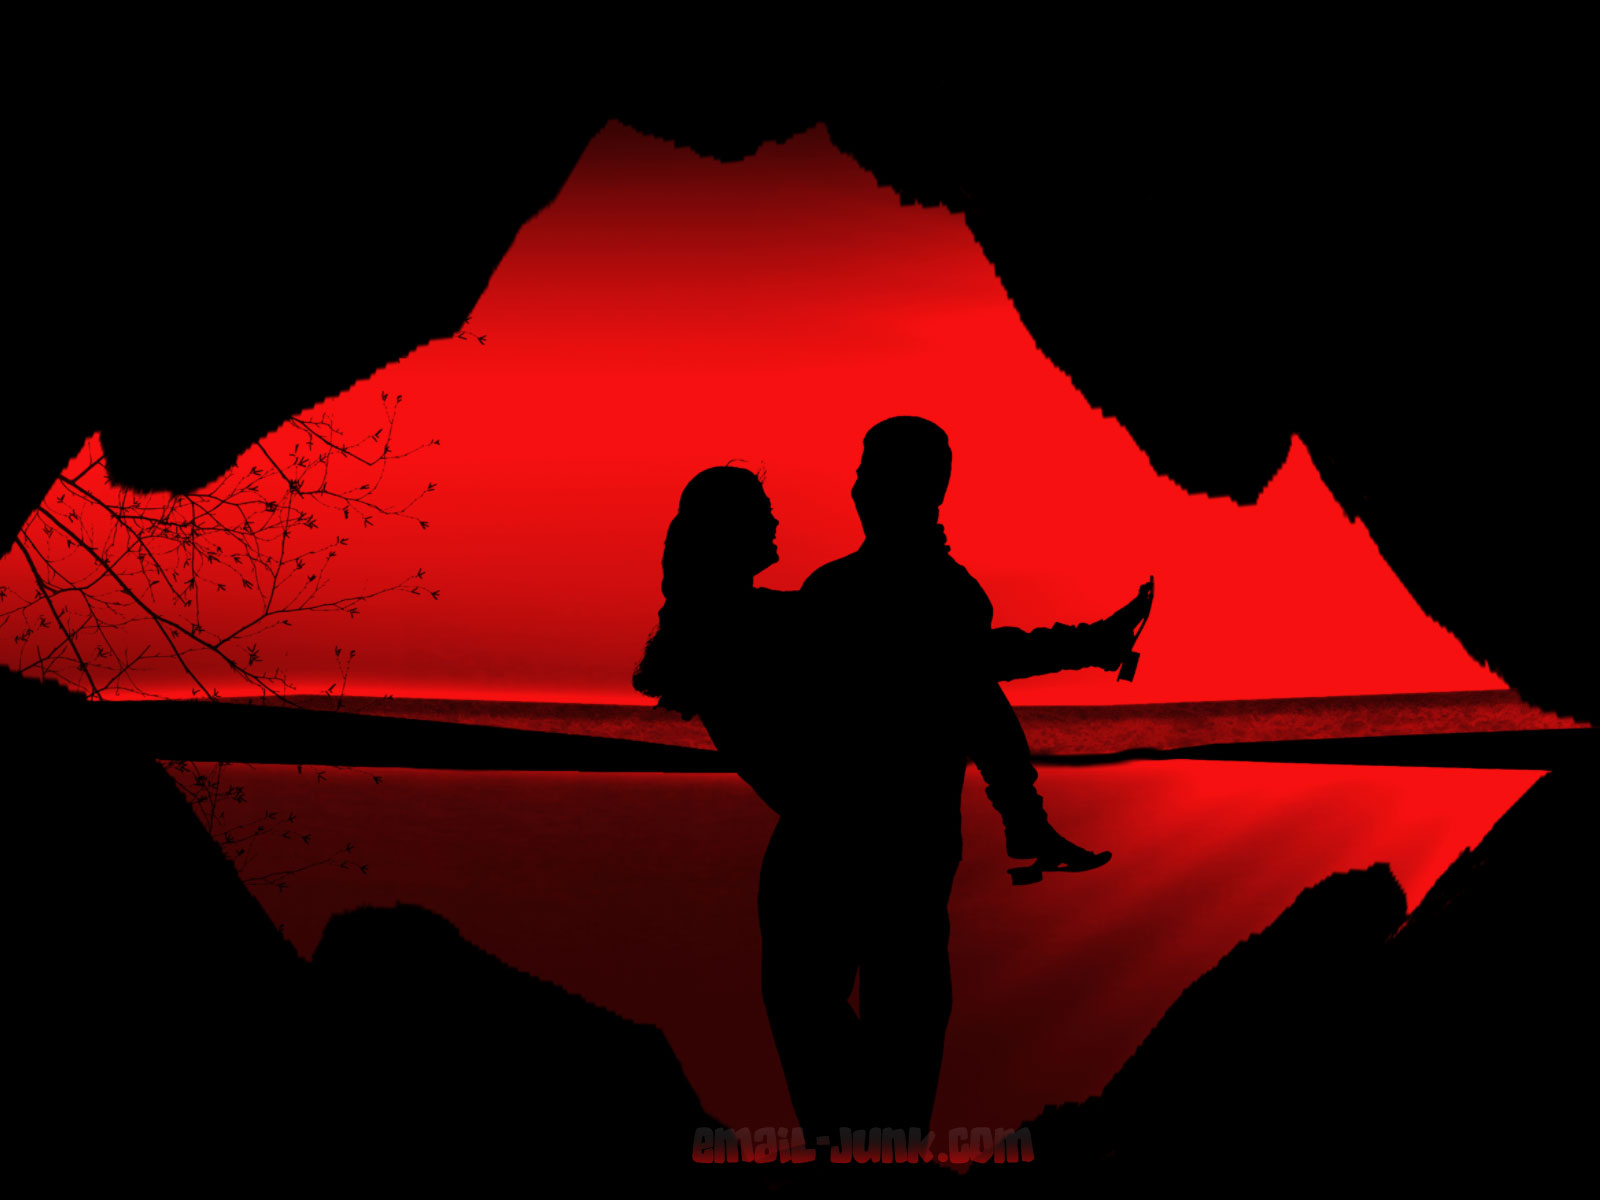  love with red background   Romantic Love wallpapers for Valentines 1600x1200